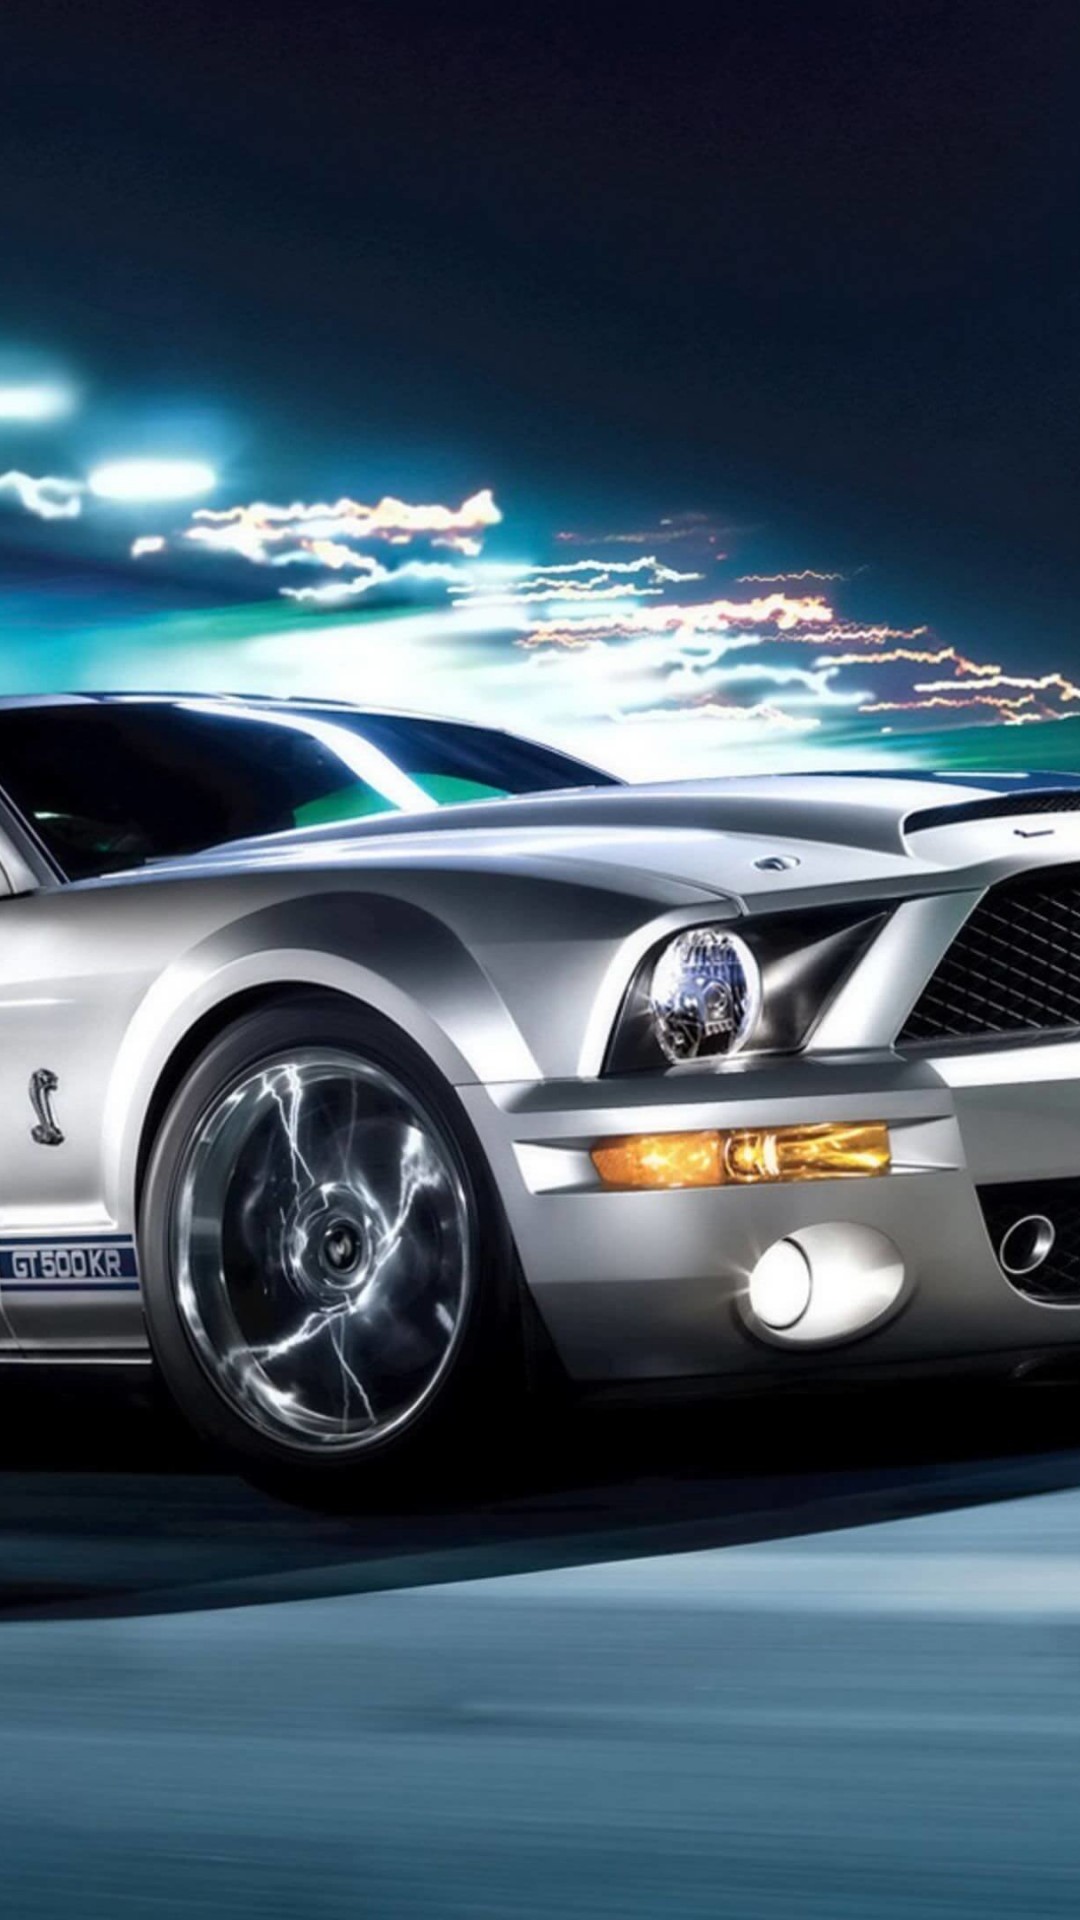 Ford Mustang Shelby GT500KR Wallpaper for SONY Xperia Z1